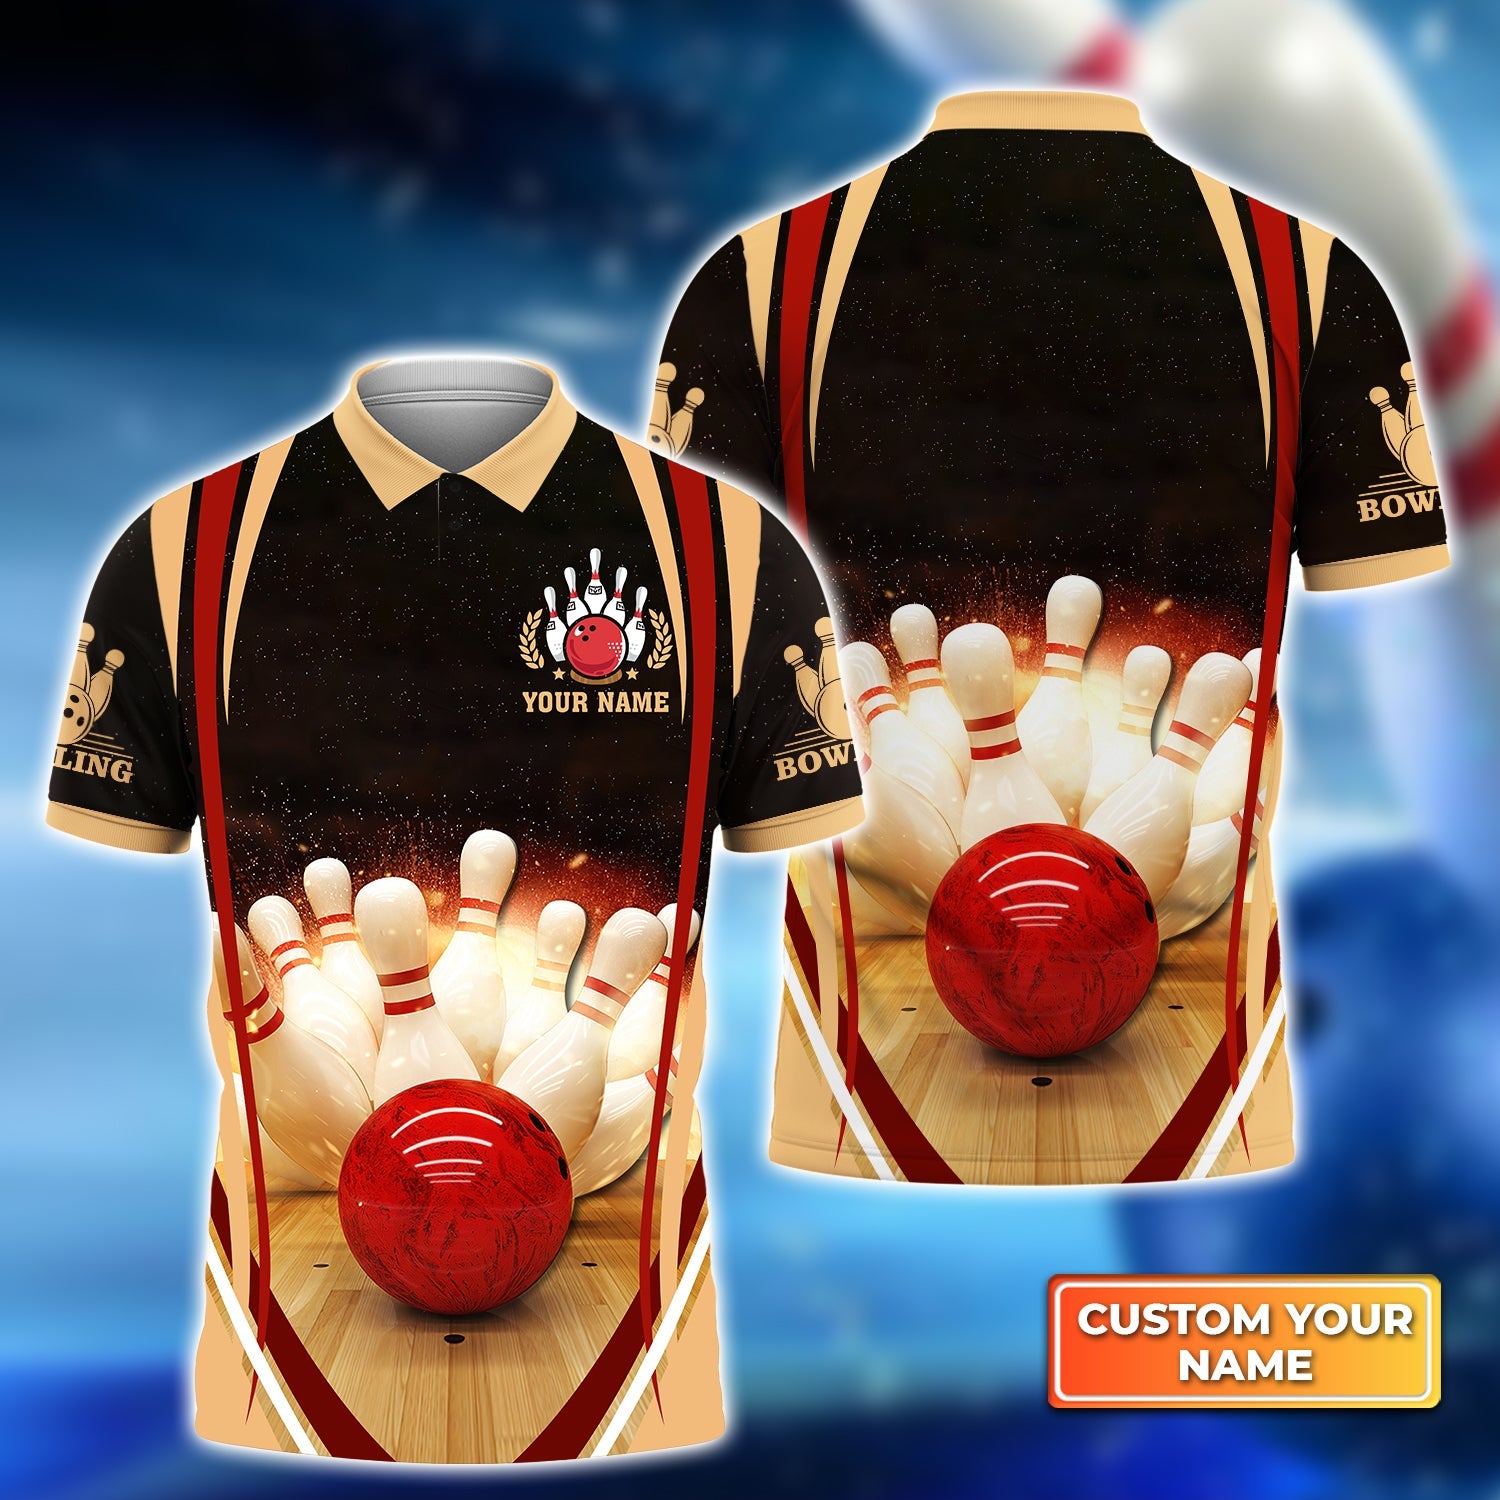 Bowling Strike Hit Fire Explosion Concept Personalized Name 3D Polo Shirt